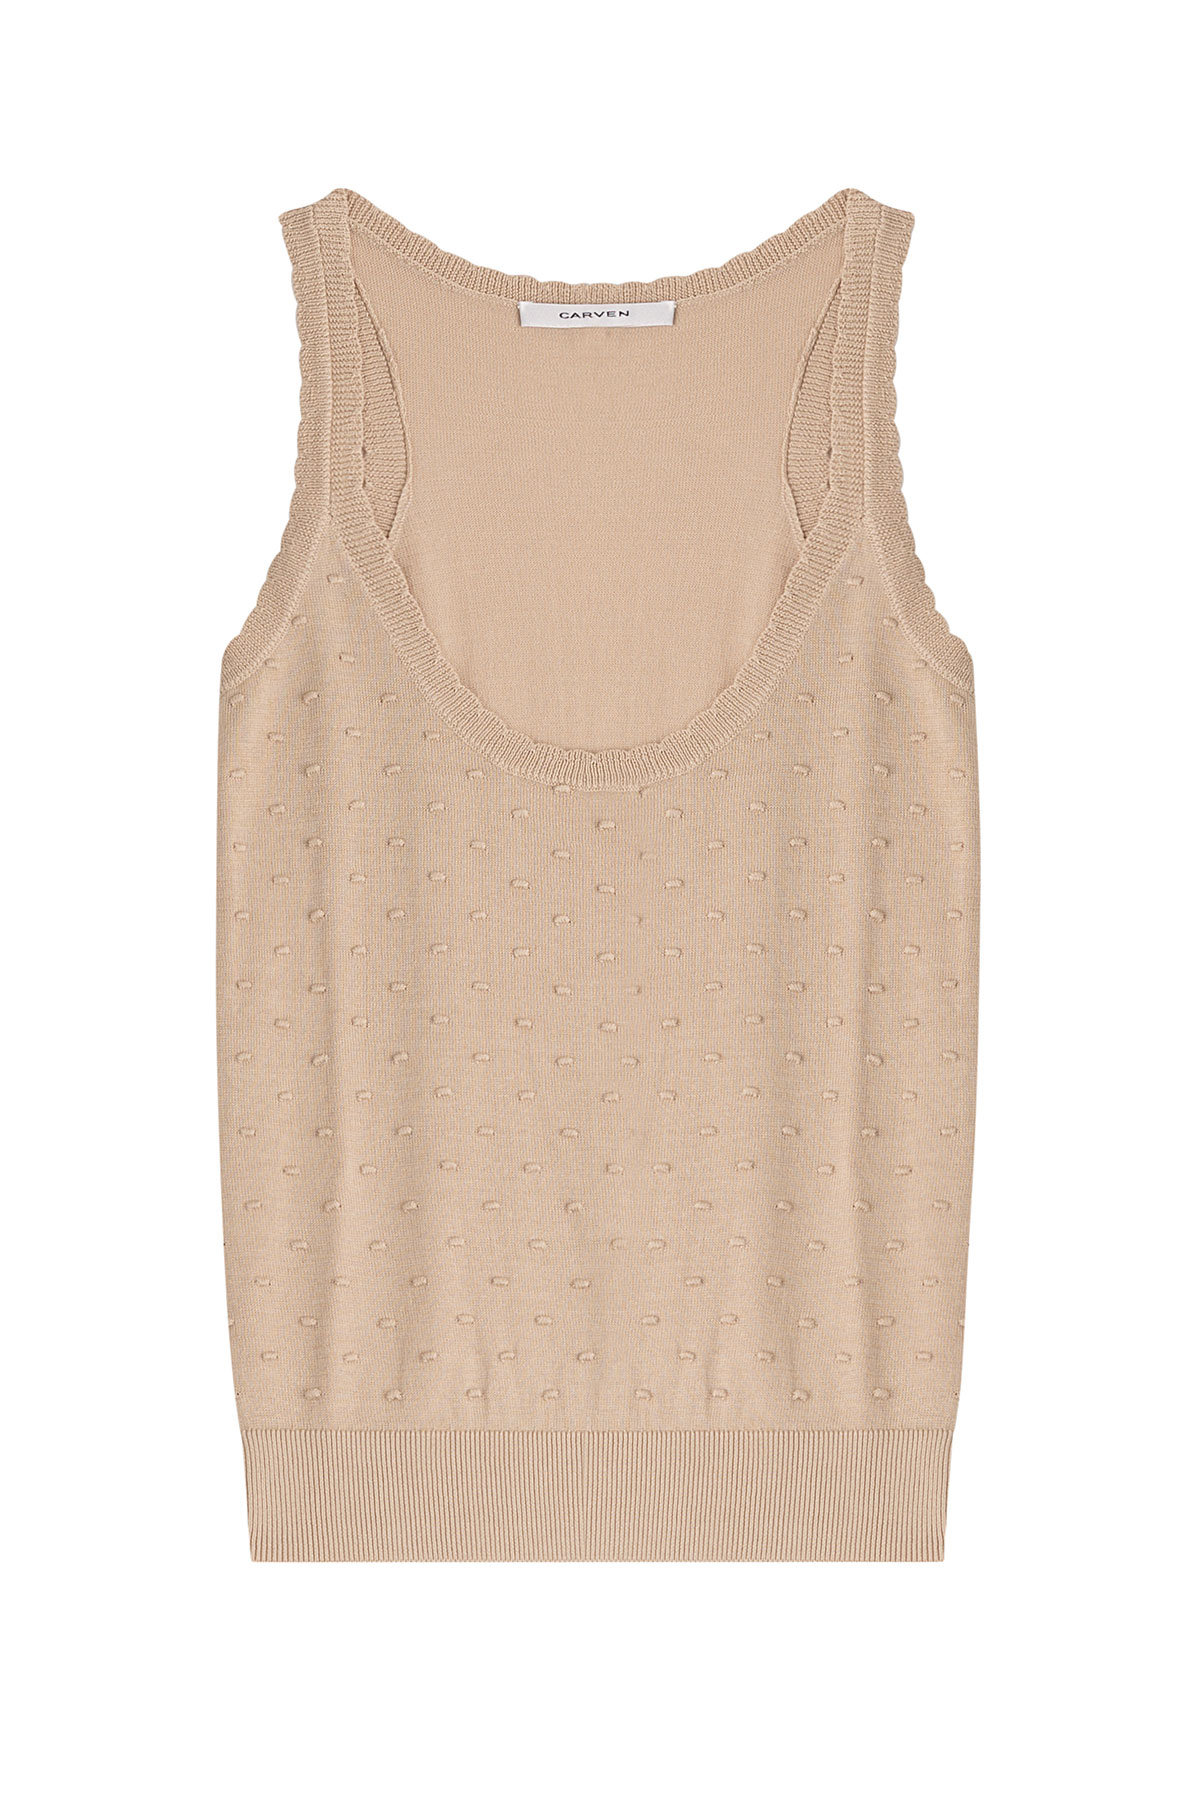 Carven - Textured Sleevess Top with Cotton